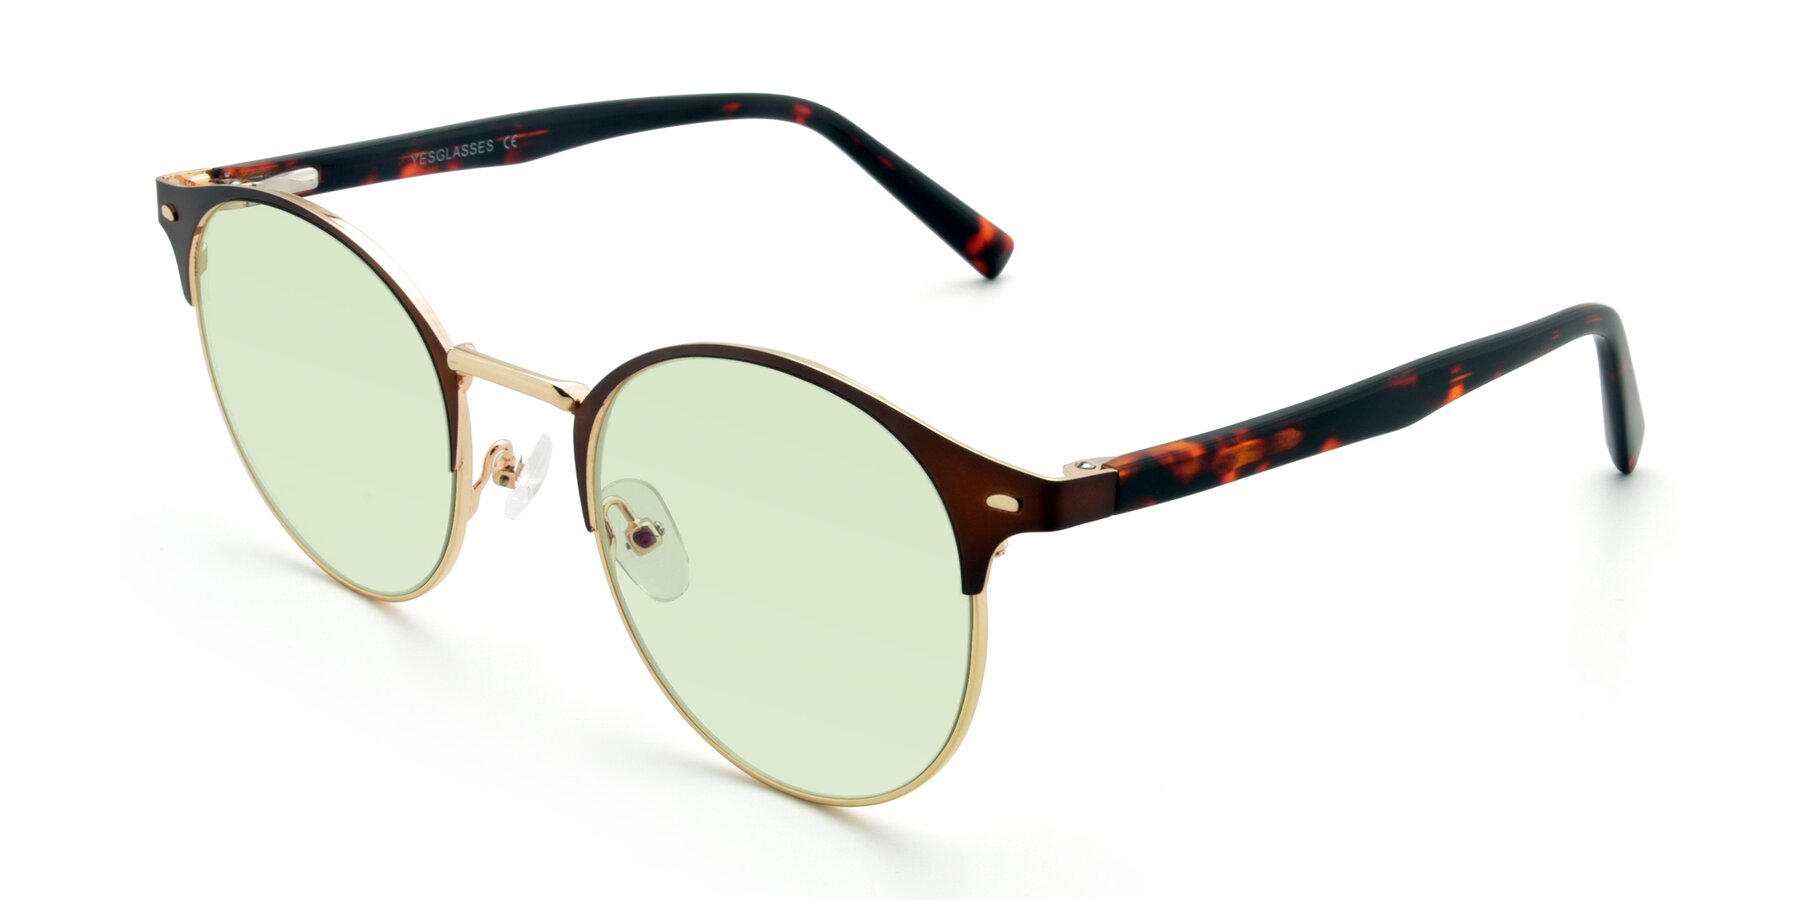 Angle of 9099 in Brown-Gold with Light Green Tinted Lenses